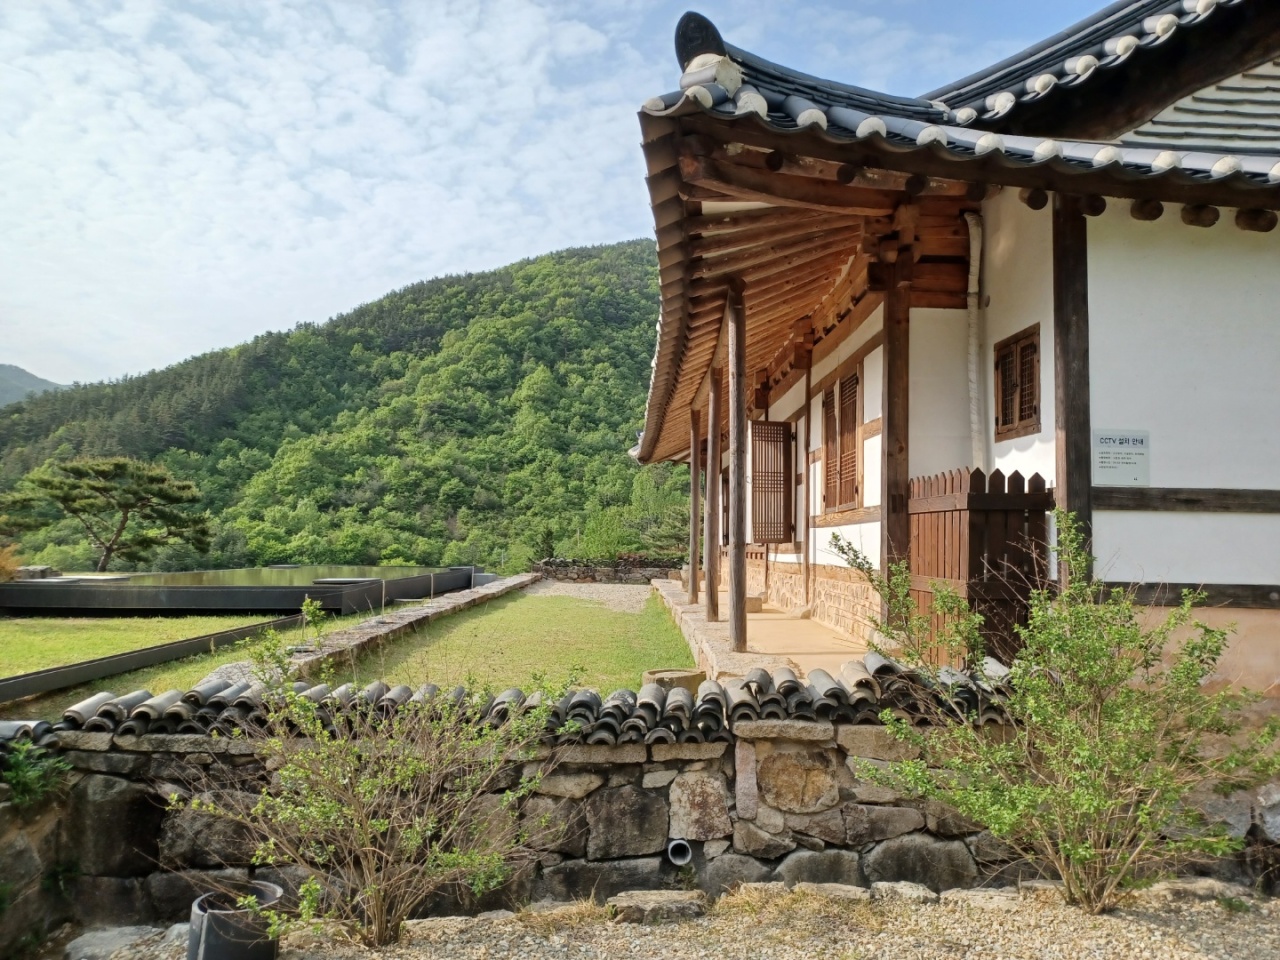 Guests can stay overnight in Awon’s 250-year-old hanok. (Lee Si-jin/The Korea Herald)